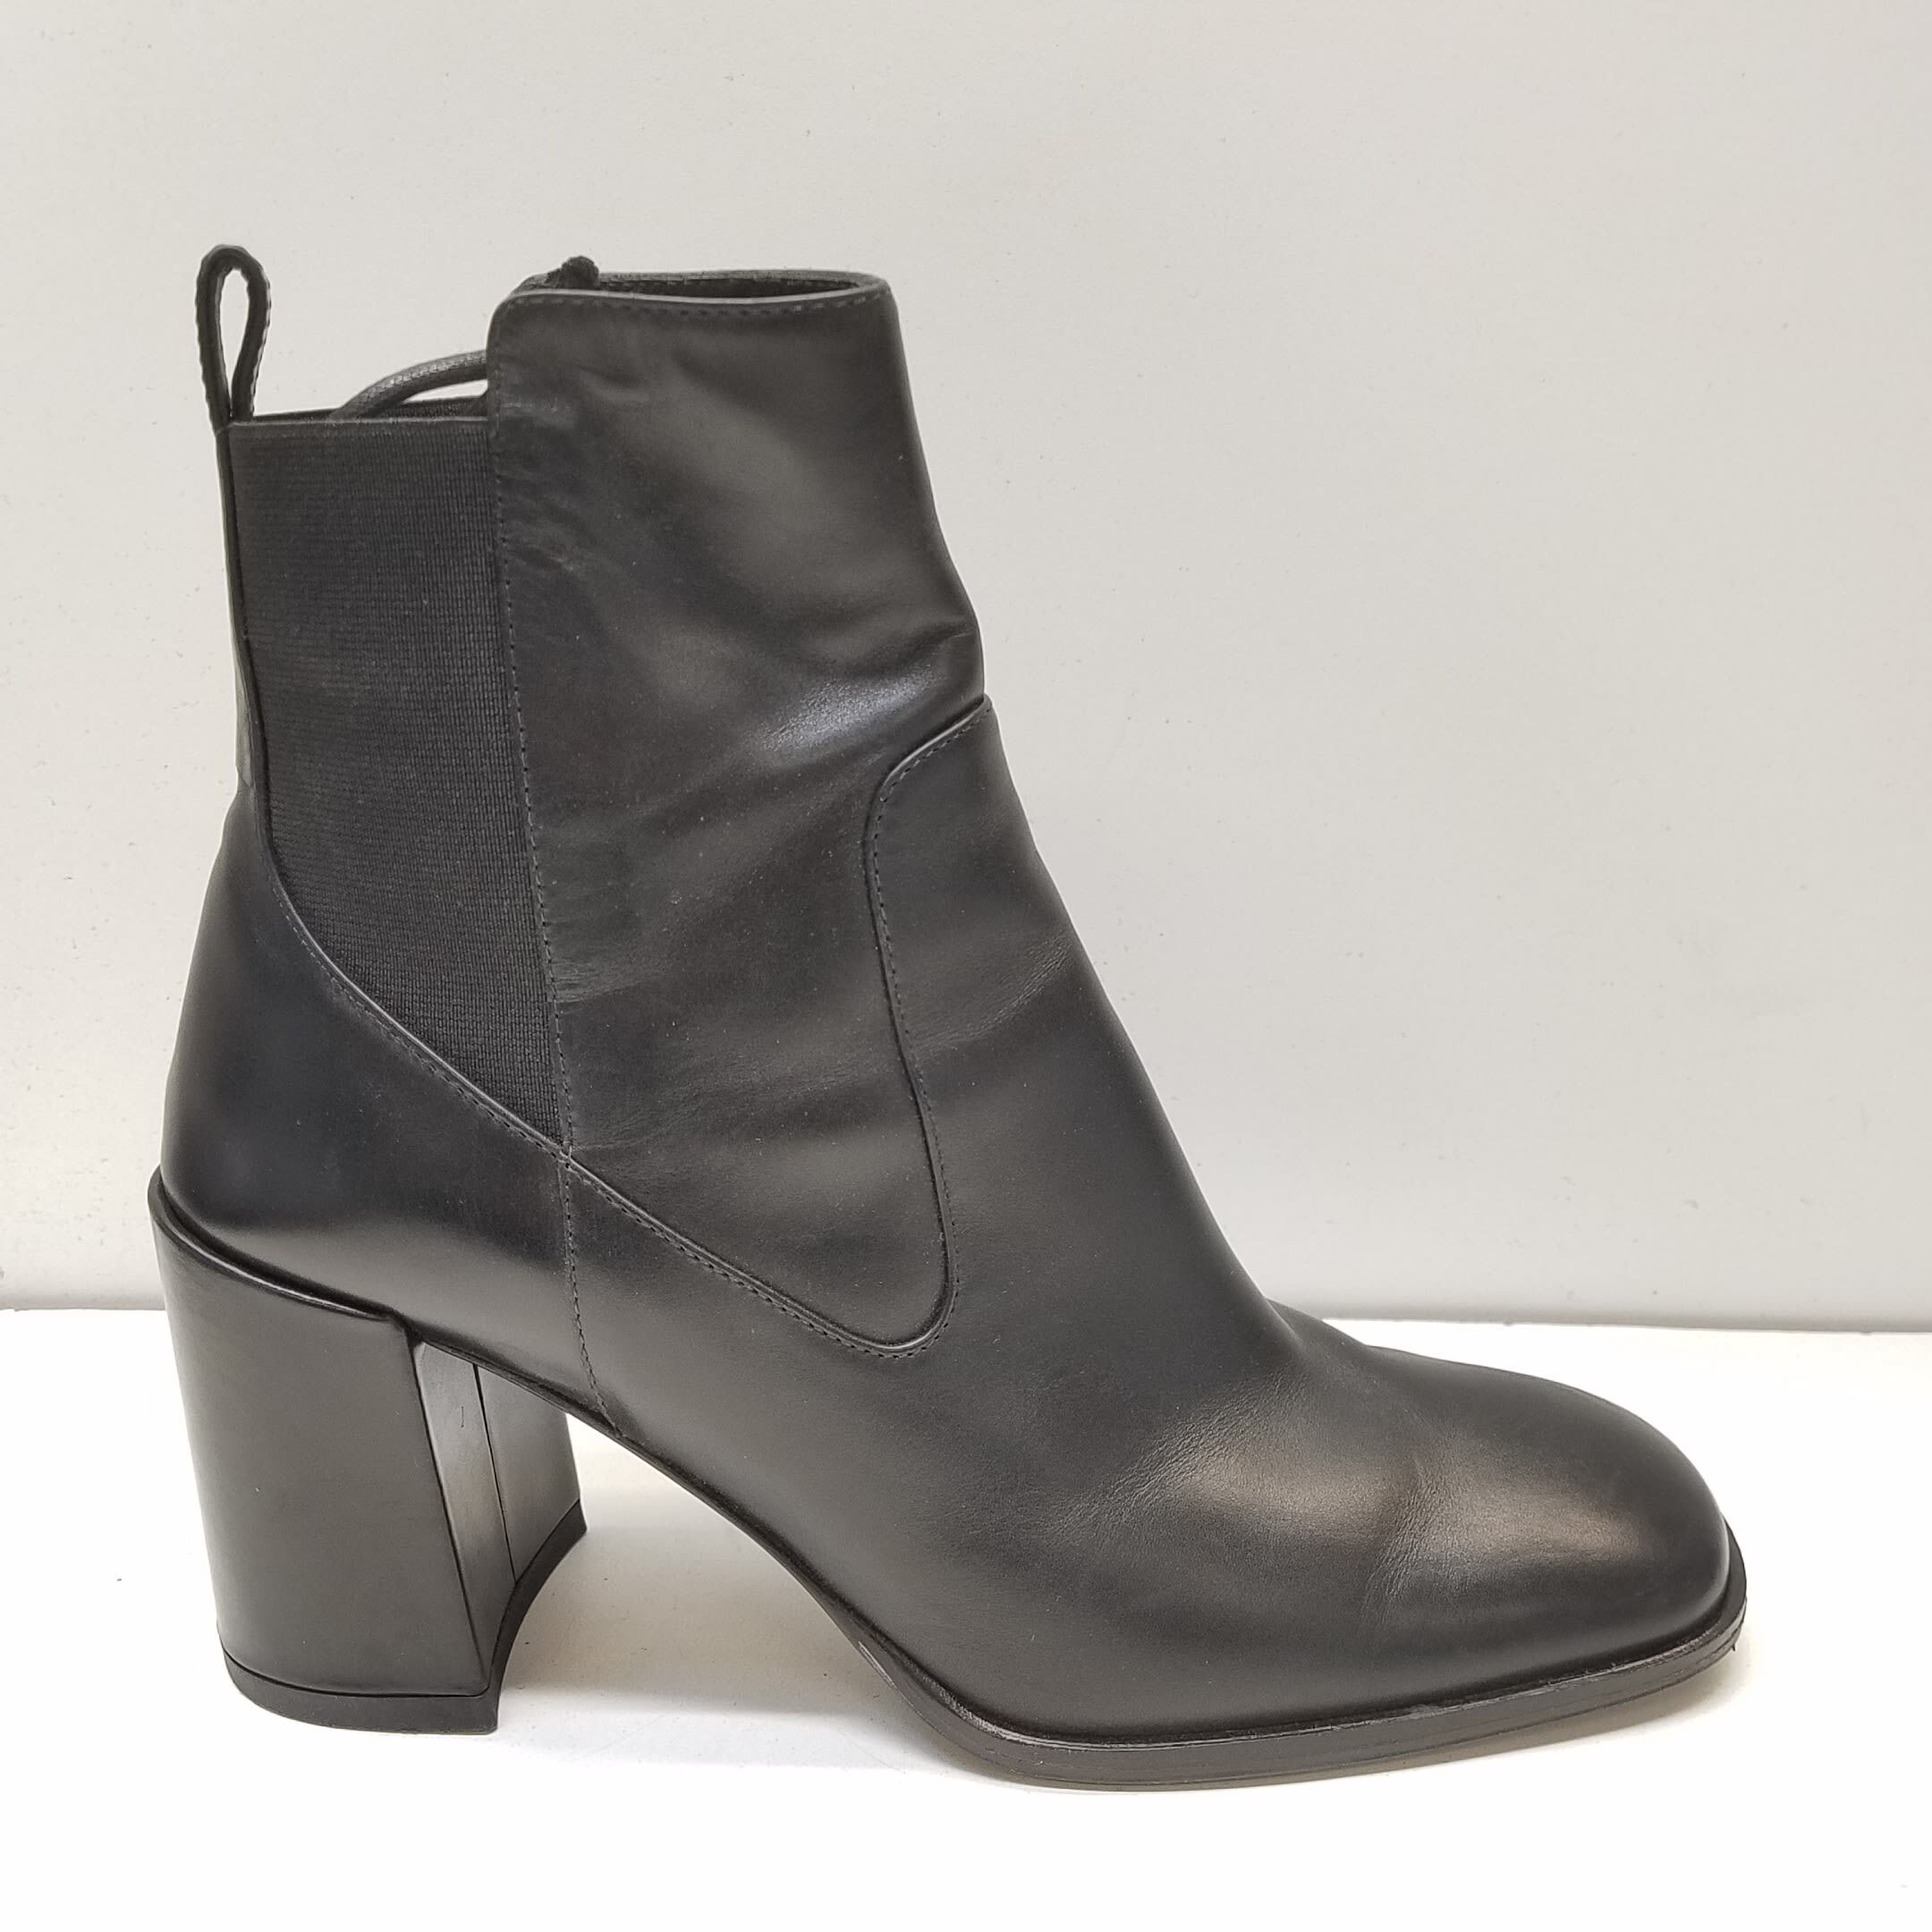 Guess | Shoes | Guess Black Leather High Heel Boots Size 6 | Poshmark